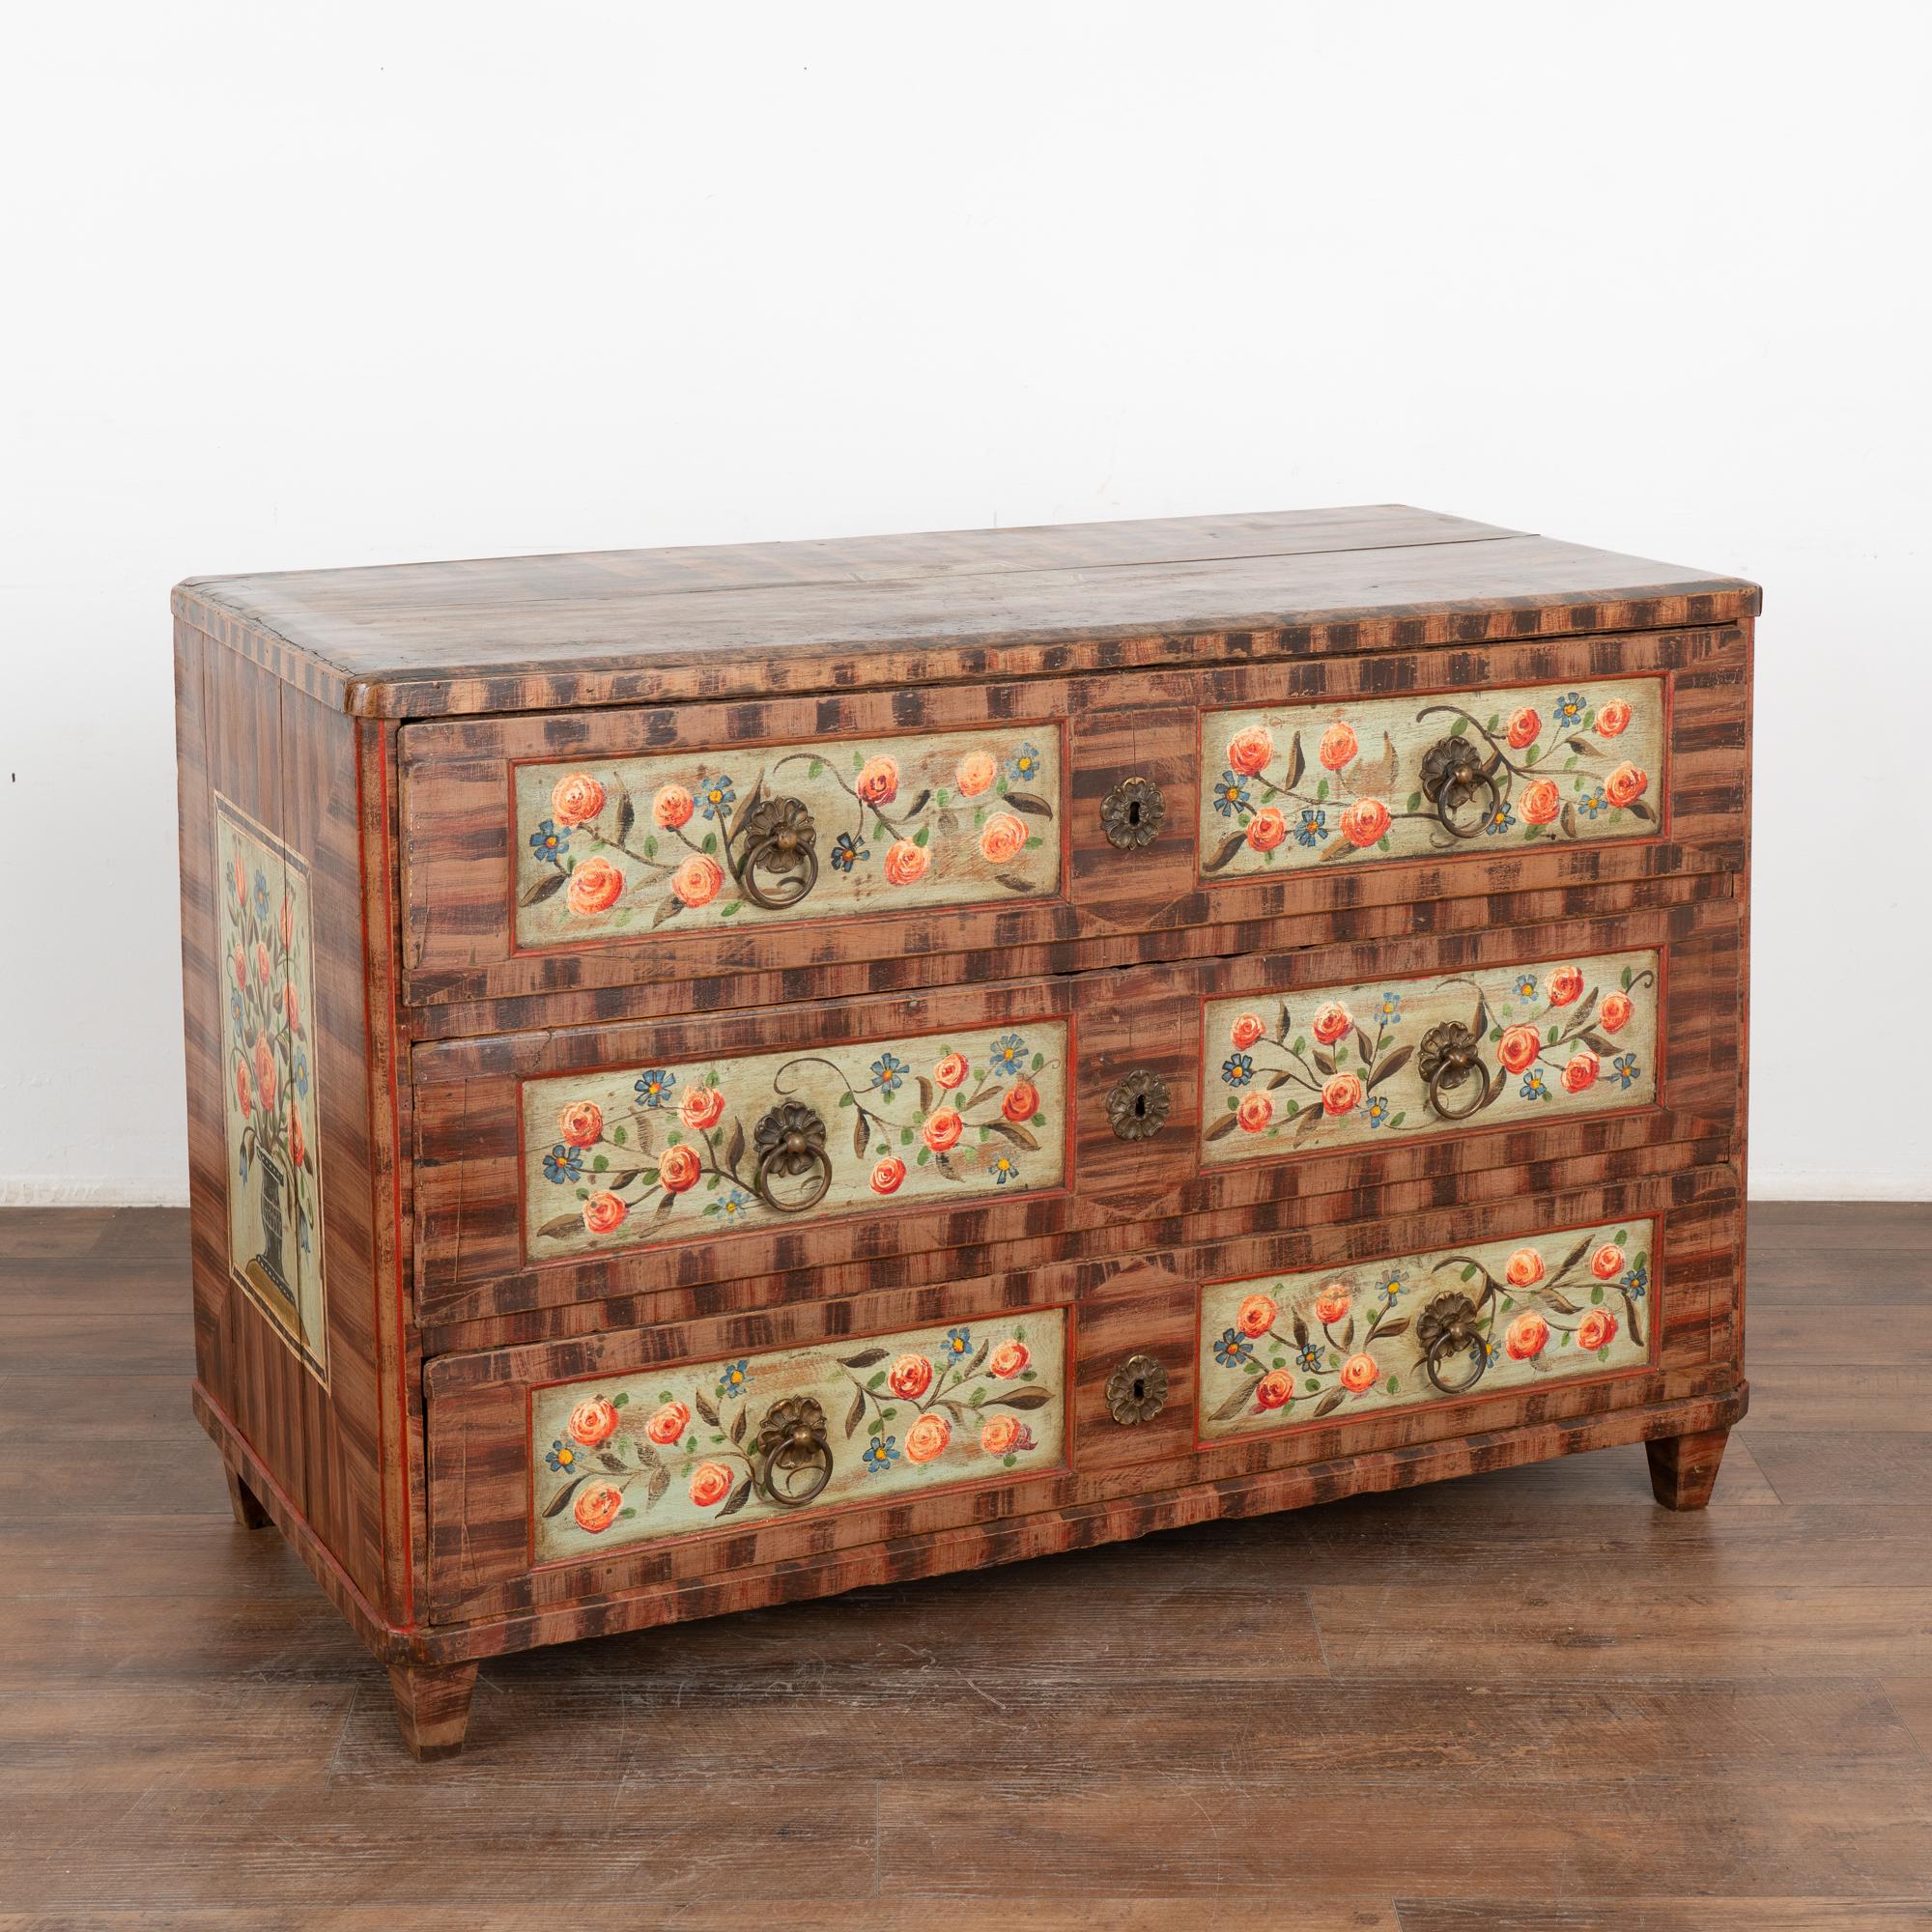 The vibrant colors are all original on this hand-painted antique chest of 3 large drawers from Hungary.
The lovely floral painted panels were a traditional folk art design of the era set against the faux wood brown finish, adding a cheerful feel to